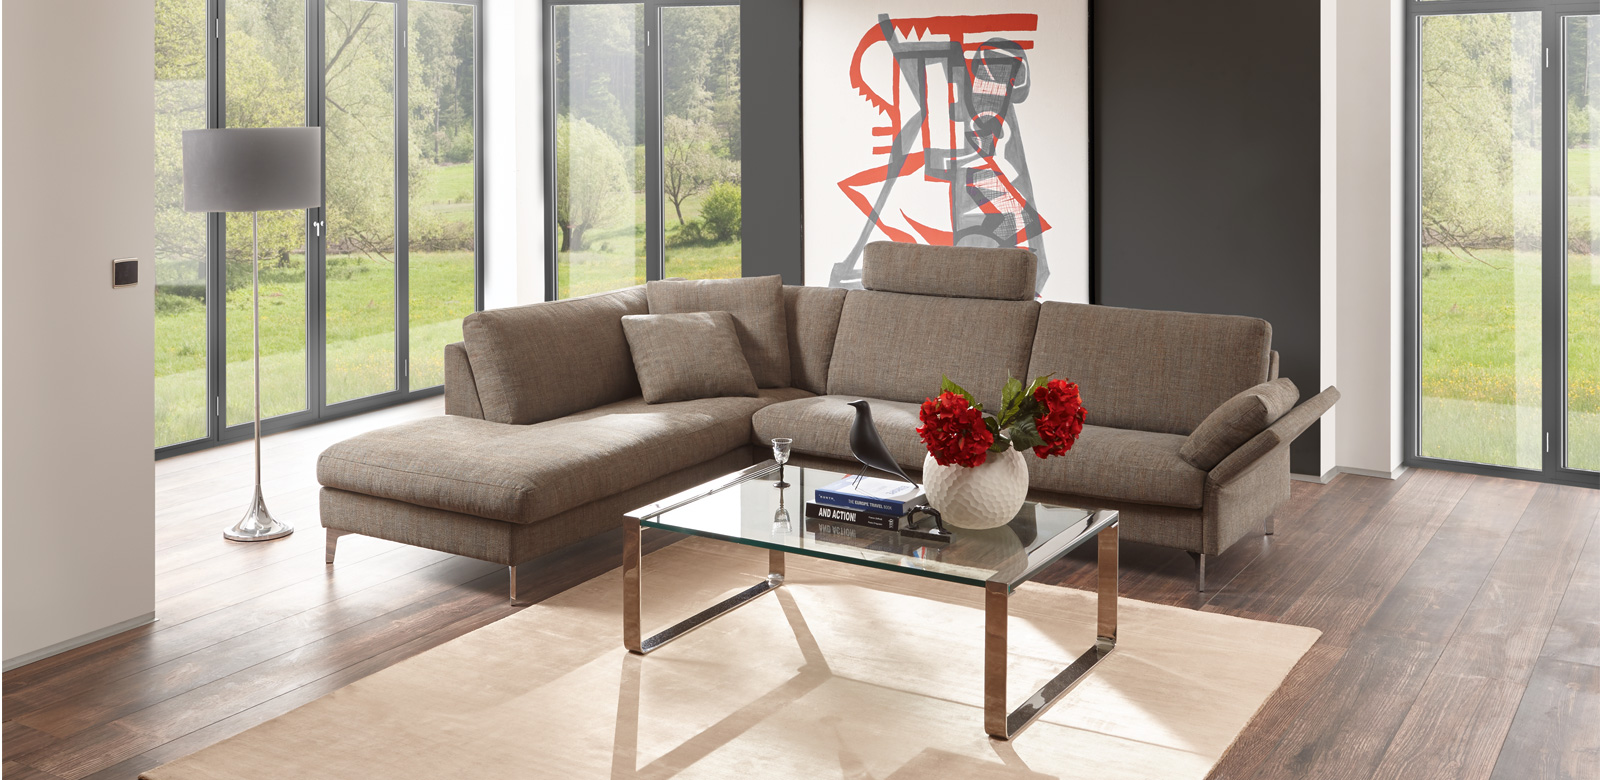 CL990 longchair combination in grey-brown fabric in a minimalist living room and view of large garden